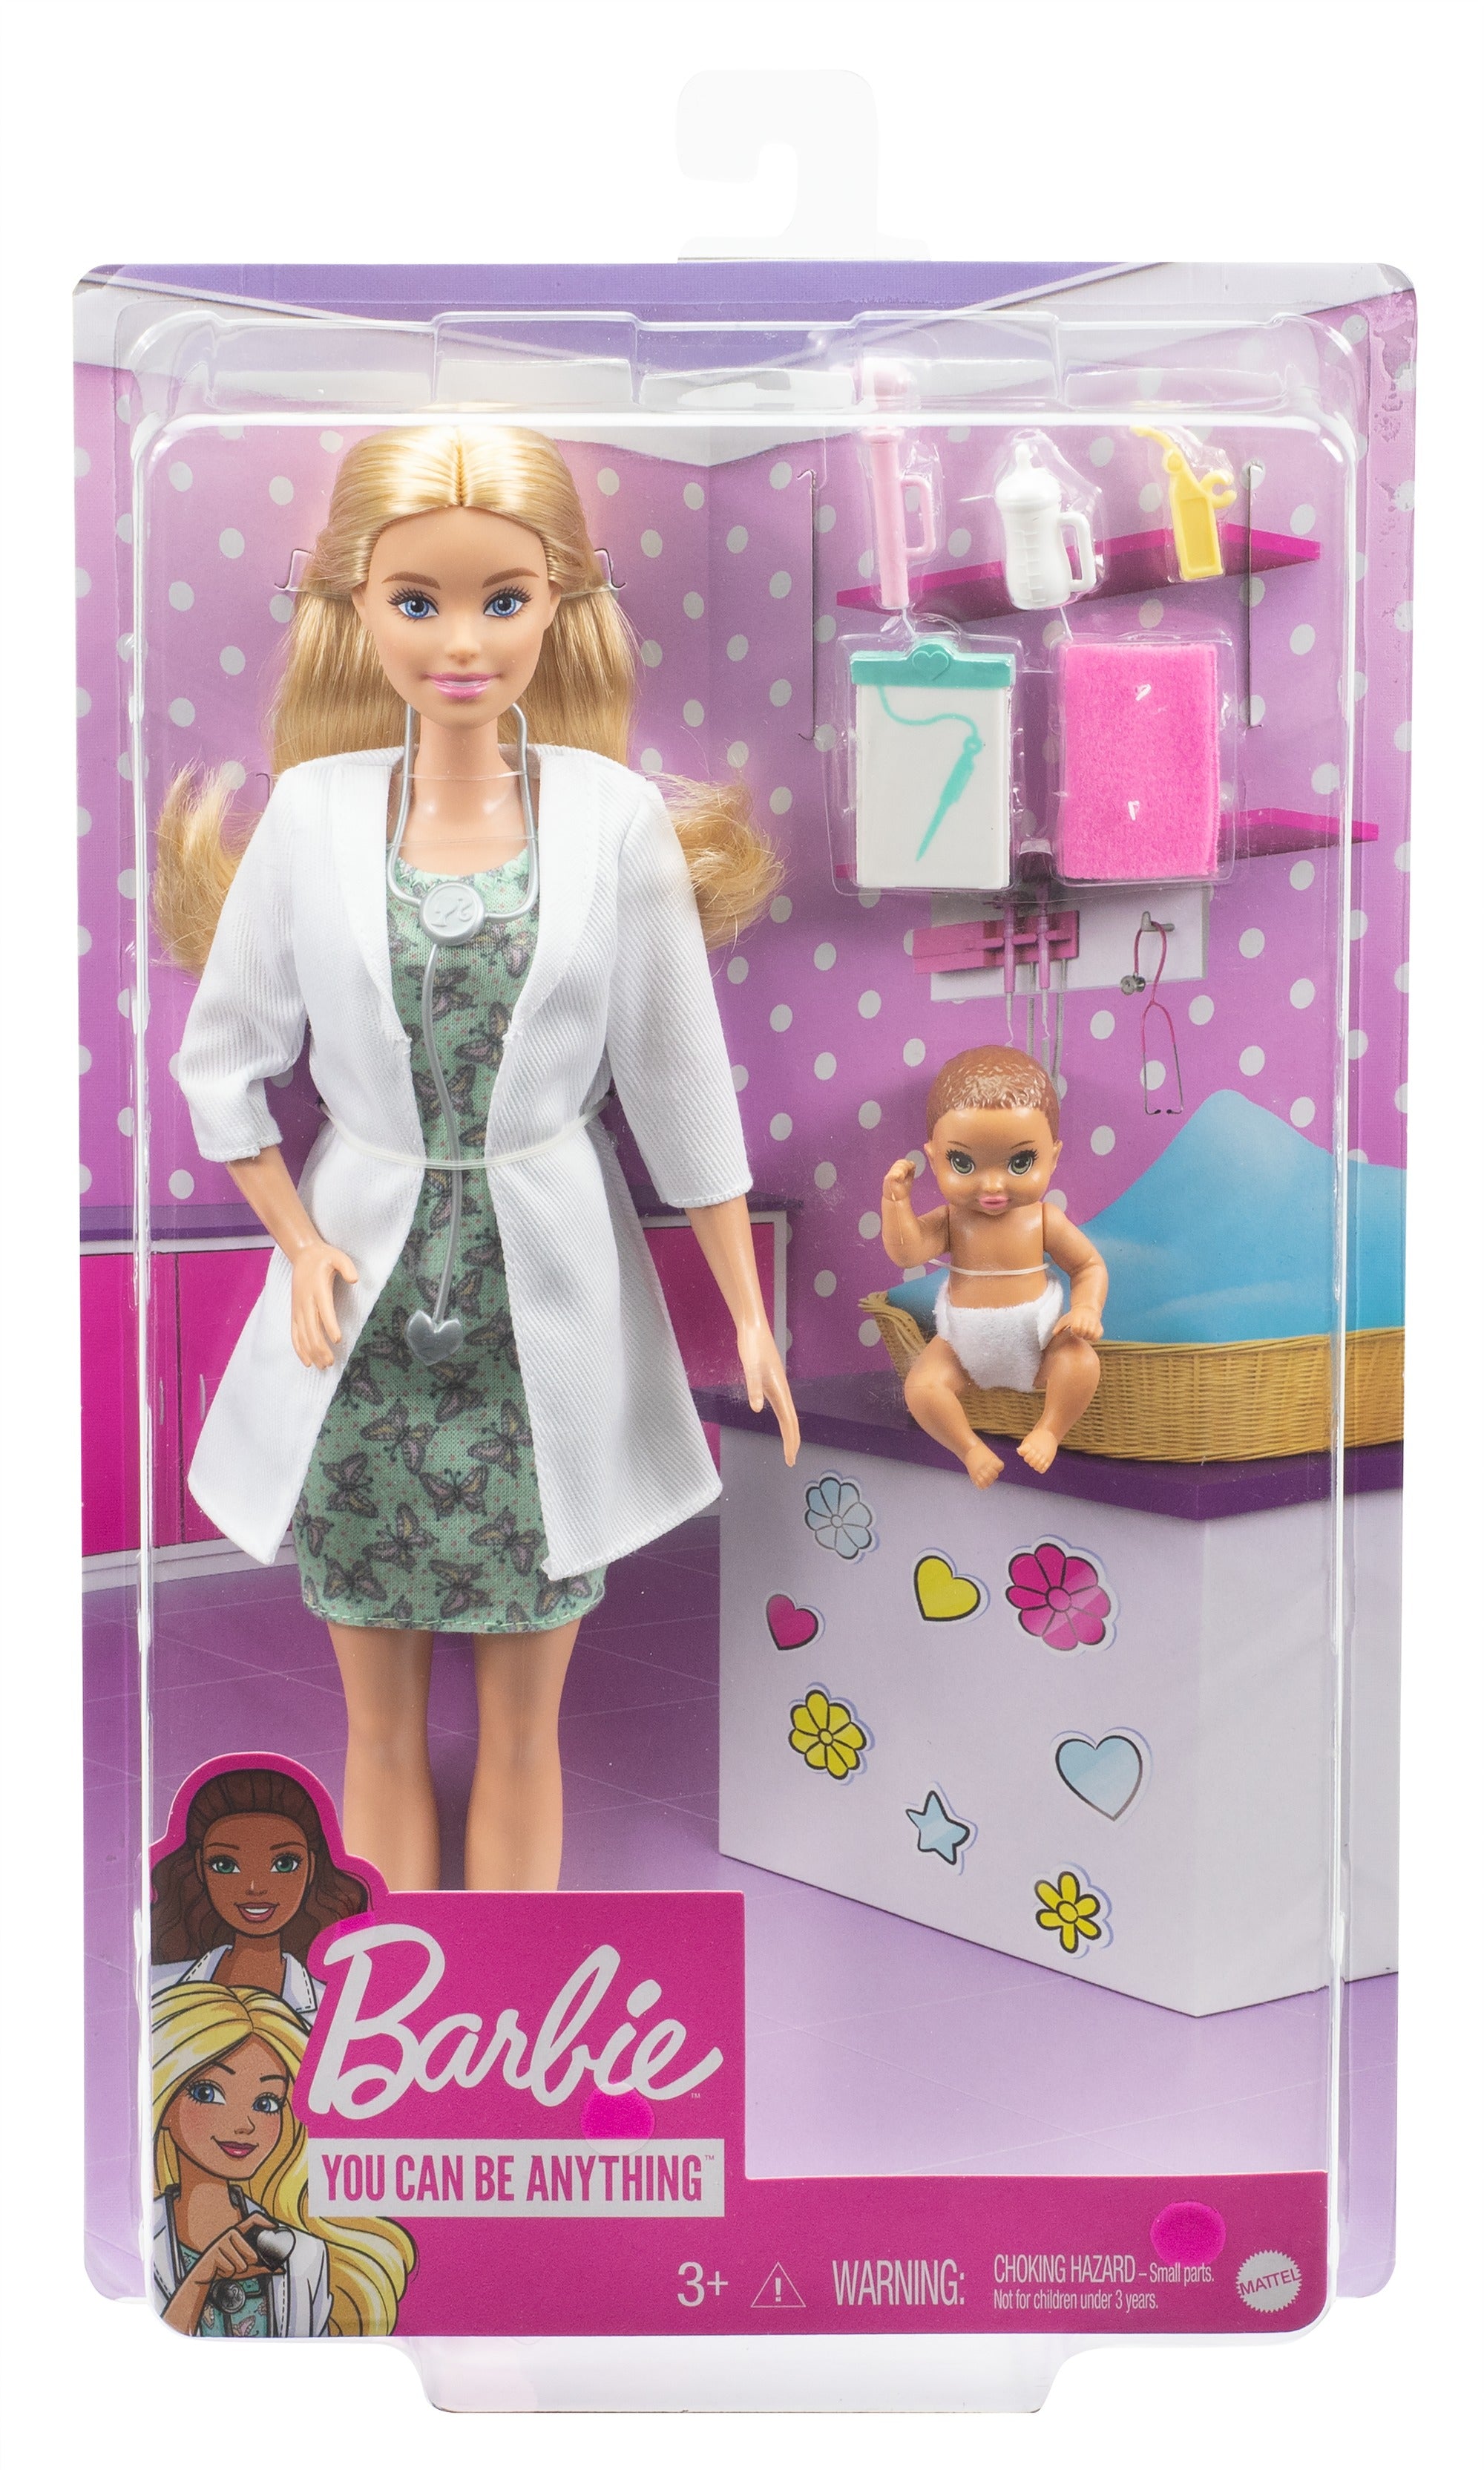 Barbie Baby Doctor Playset with 12 Inch Blonde Doll, Infant Doll, Stethoscope, Thermometer, Oscilloscope, Chart, Blanket & Baby Bottle for Kids Ages 3+